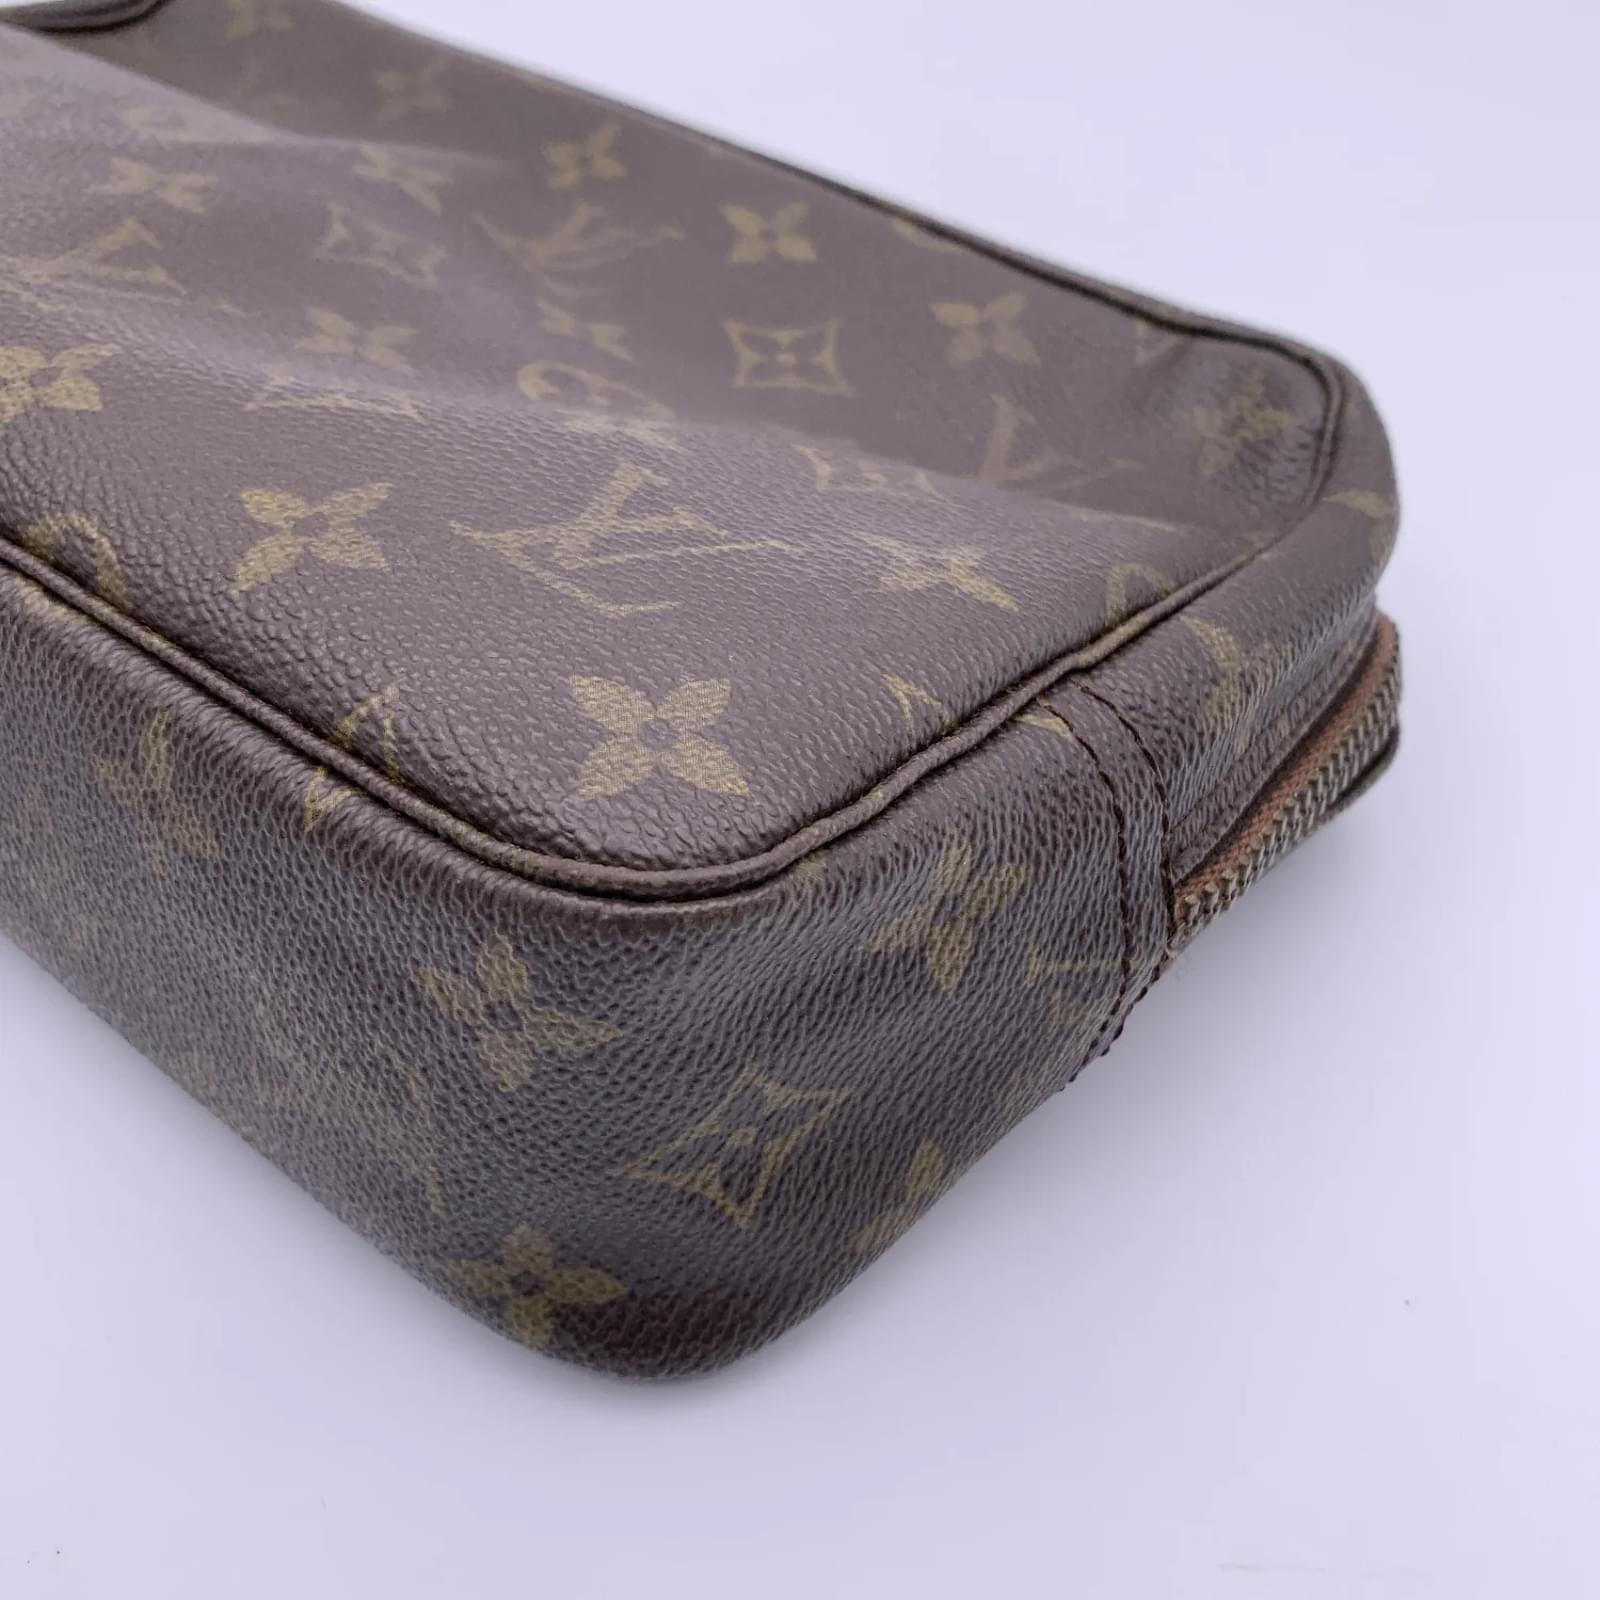 Louis Vuitton, Bags, Louis Vuitton Trousse 23 Pouch Clutch Crossbody With  Leather Strap And D